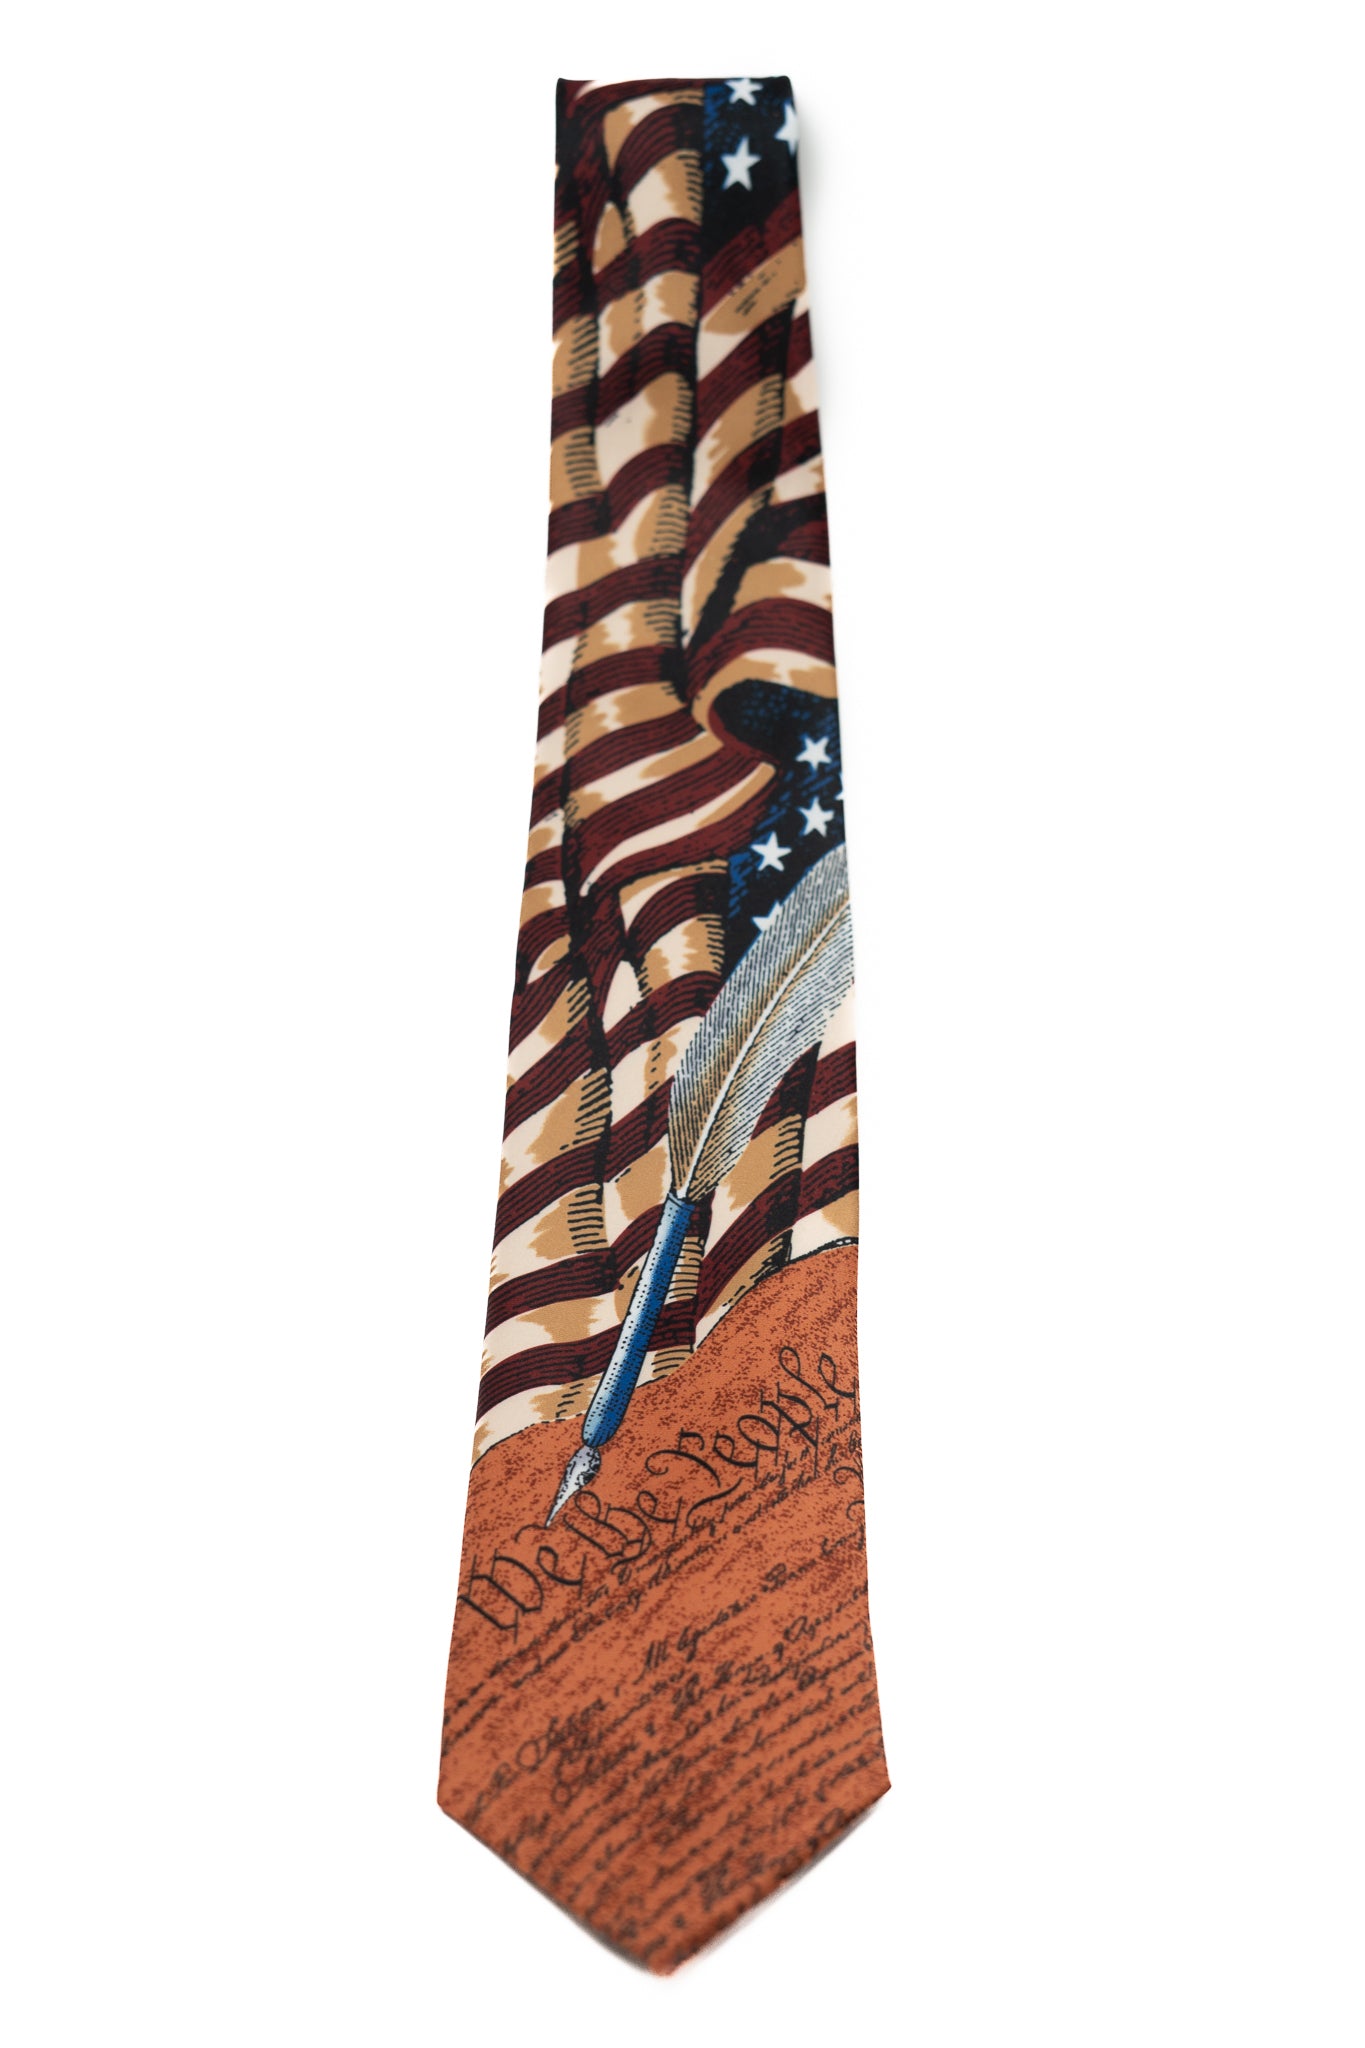 'We The People' US Constitution Tie